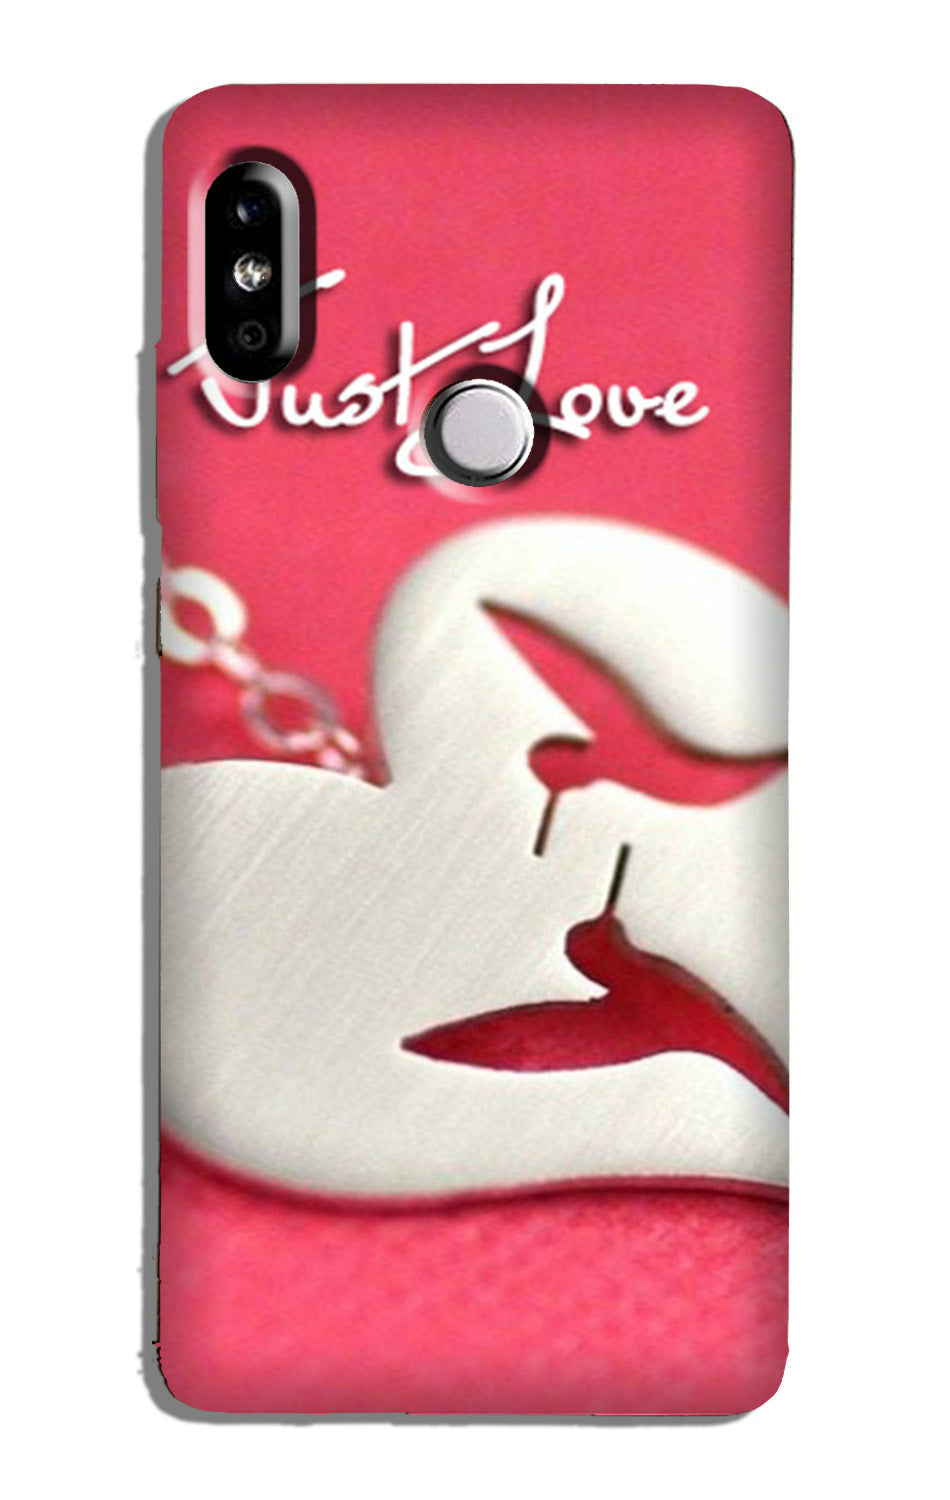 Just love Case for Redmi Note 6 Pro